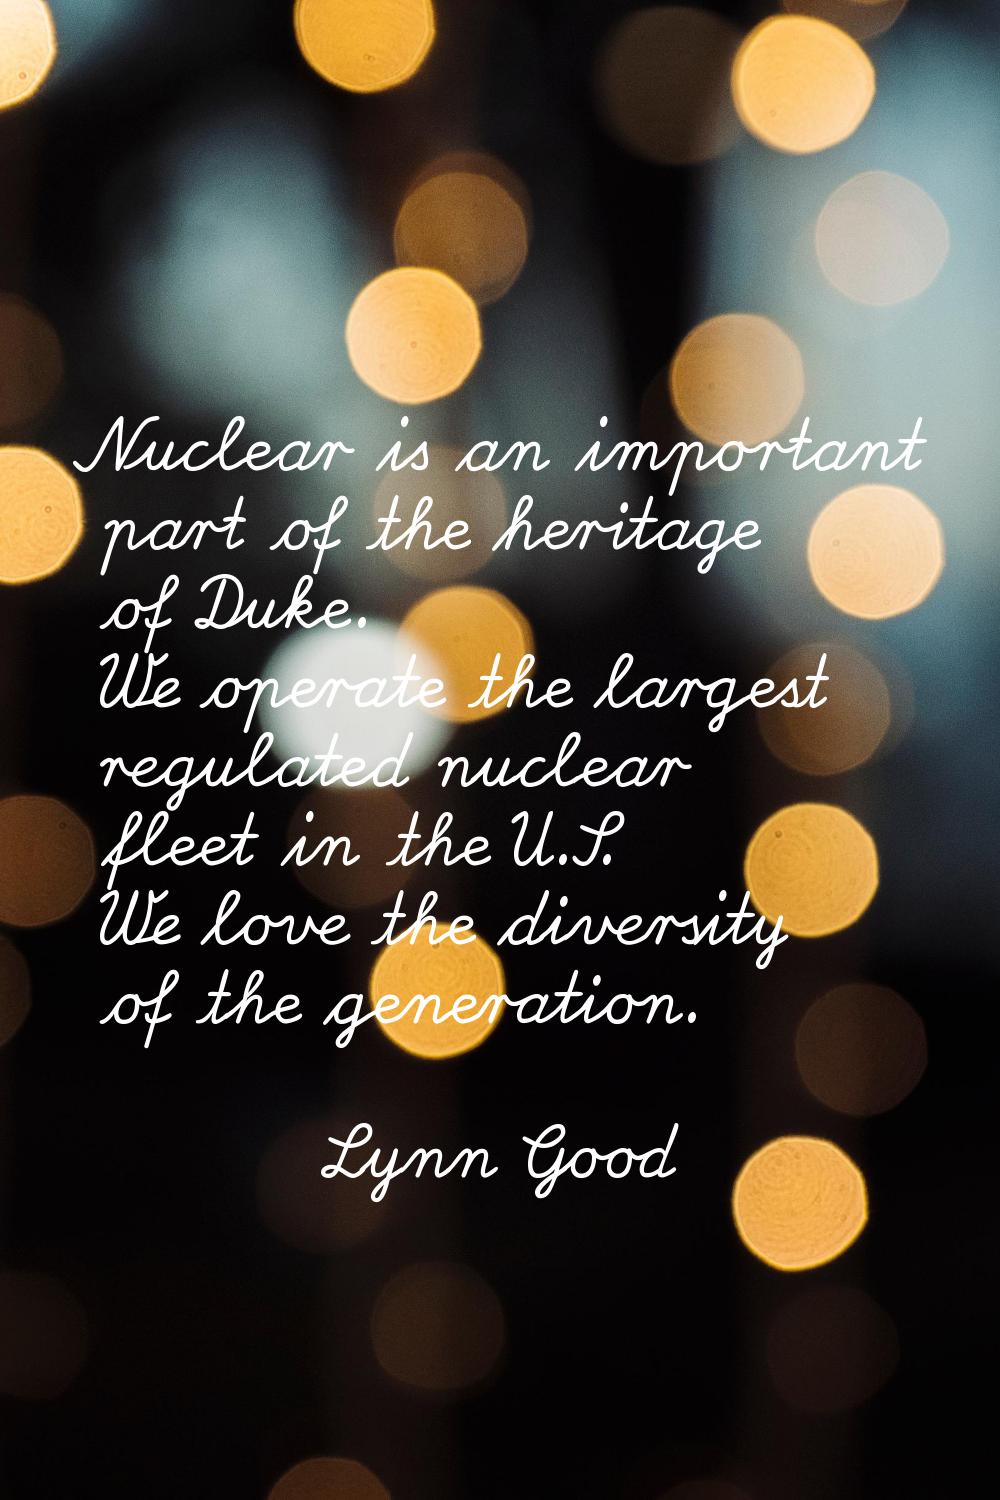 Nuclear is an important part of the heritage of Duke. We operate the largest regulated nuclear flee